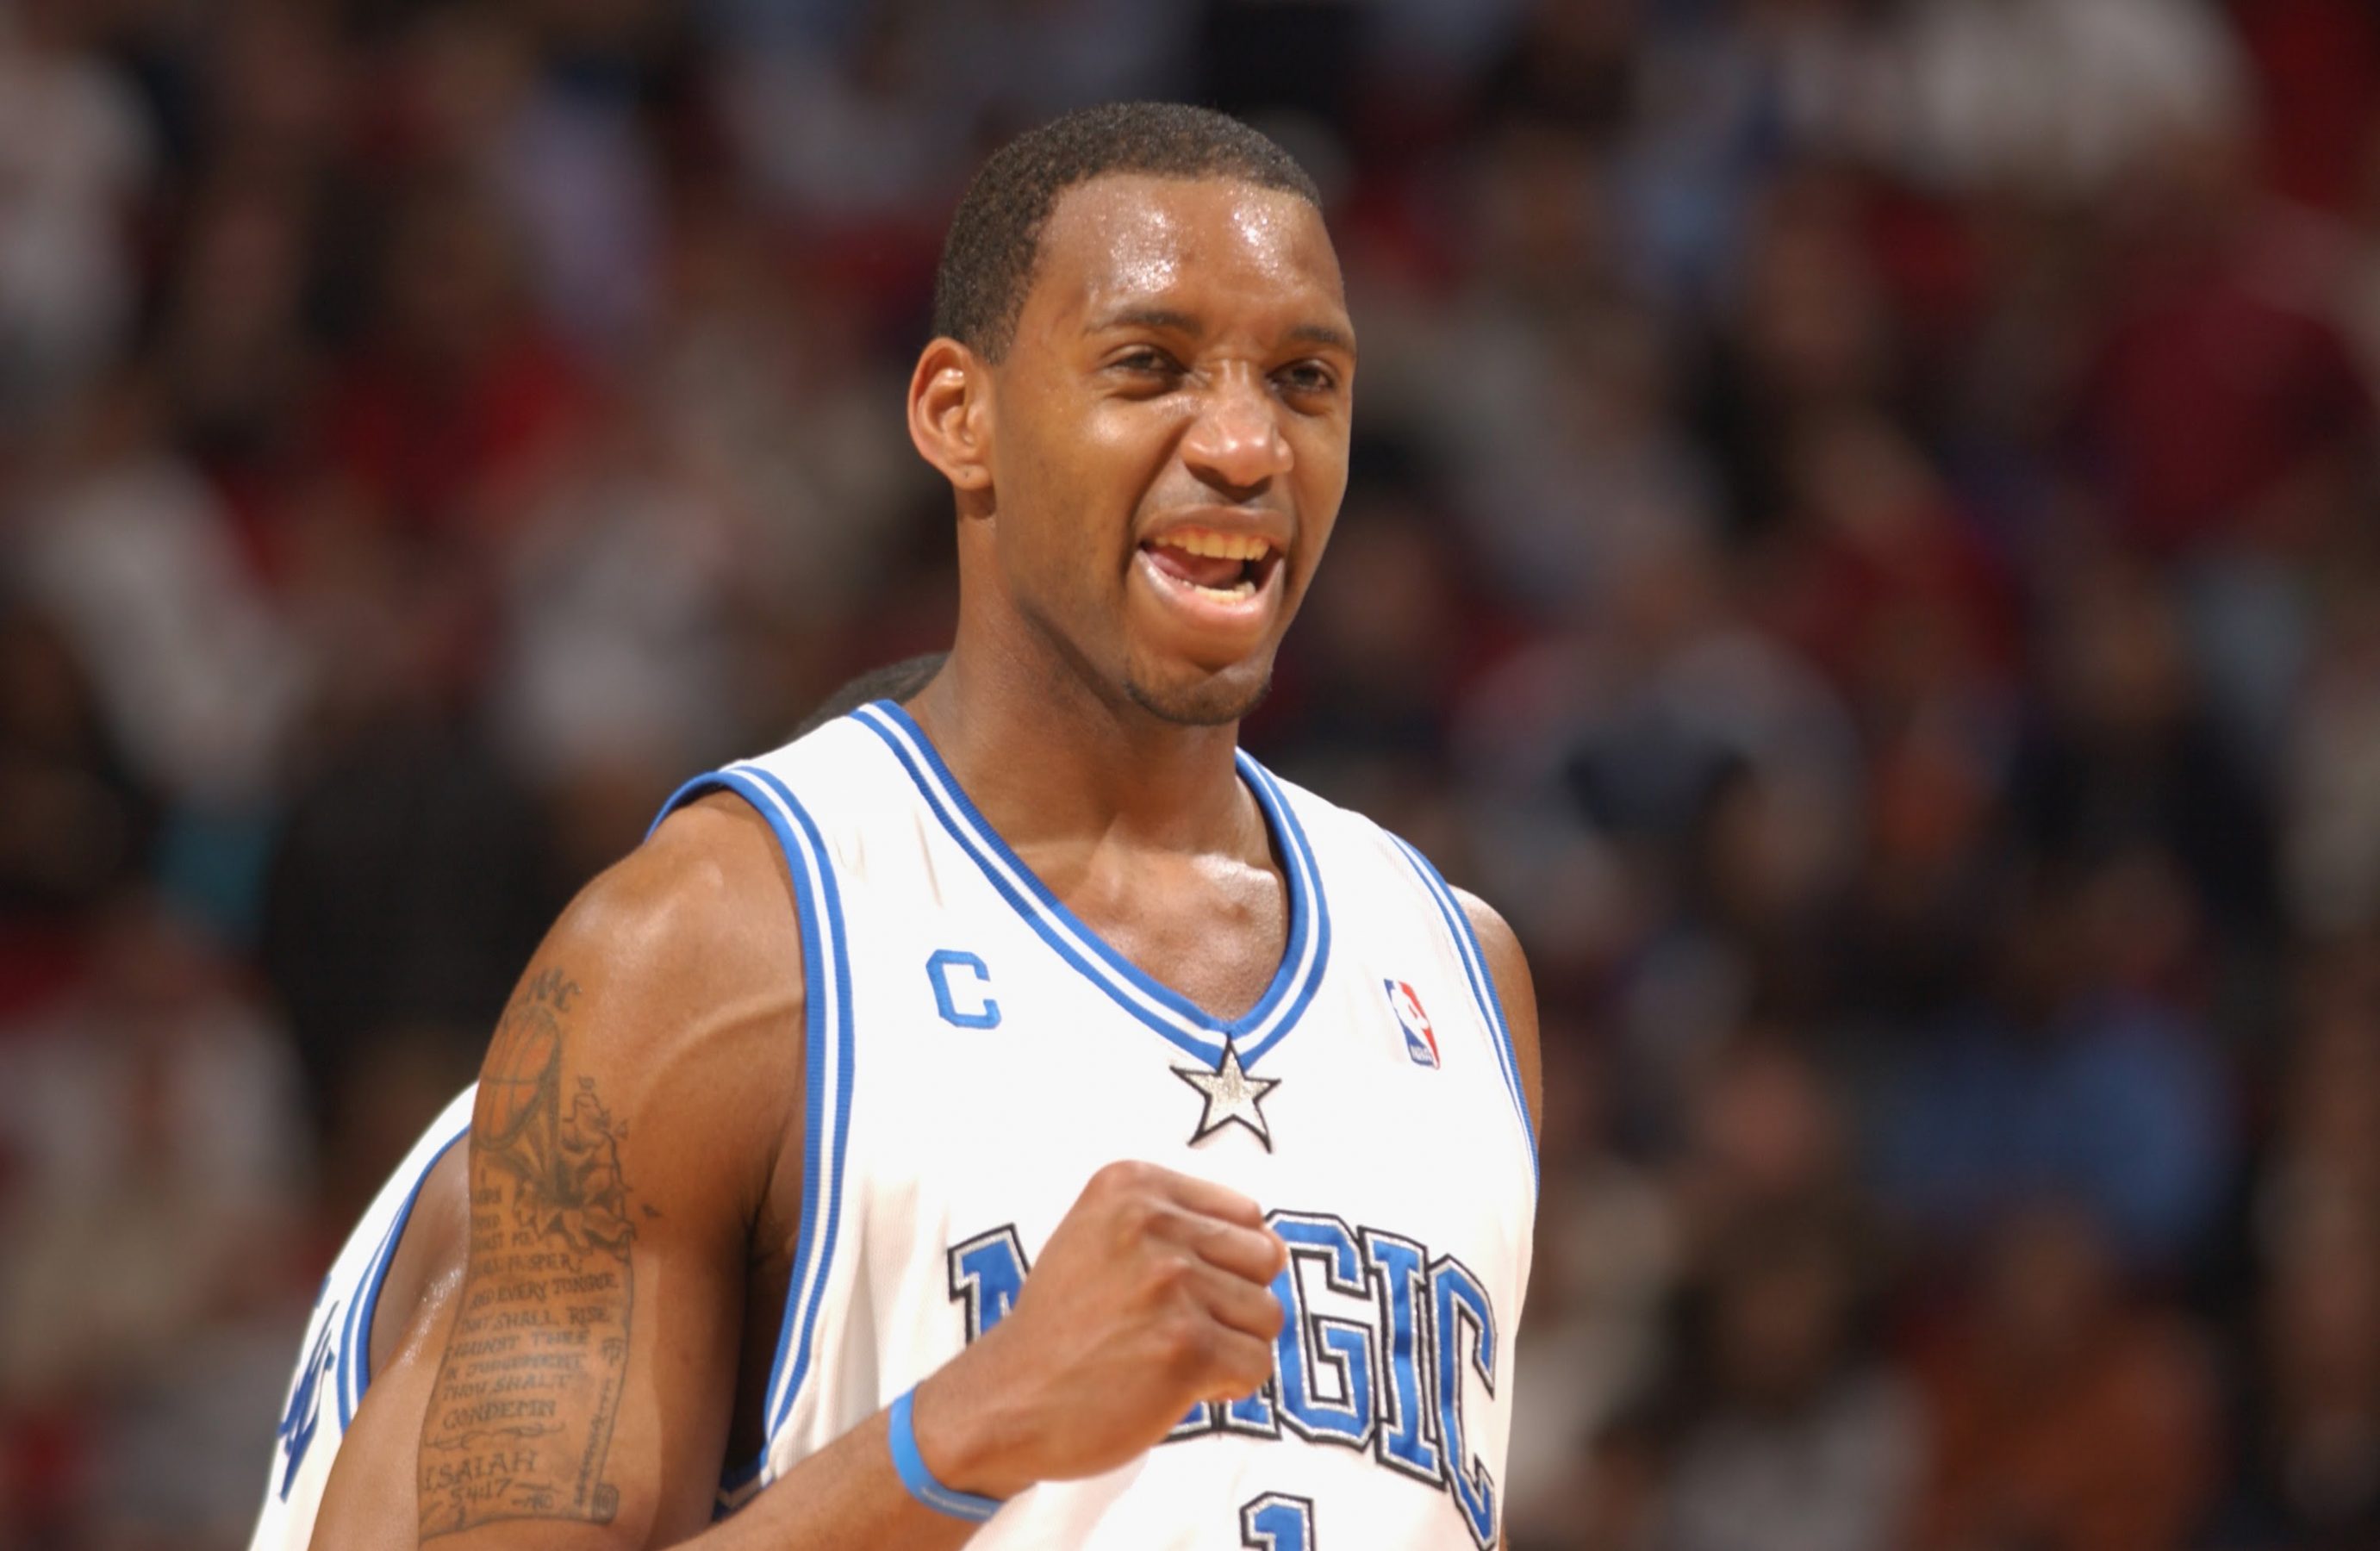 Former NBA star Tracy McGrady believes he could play for the